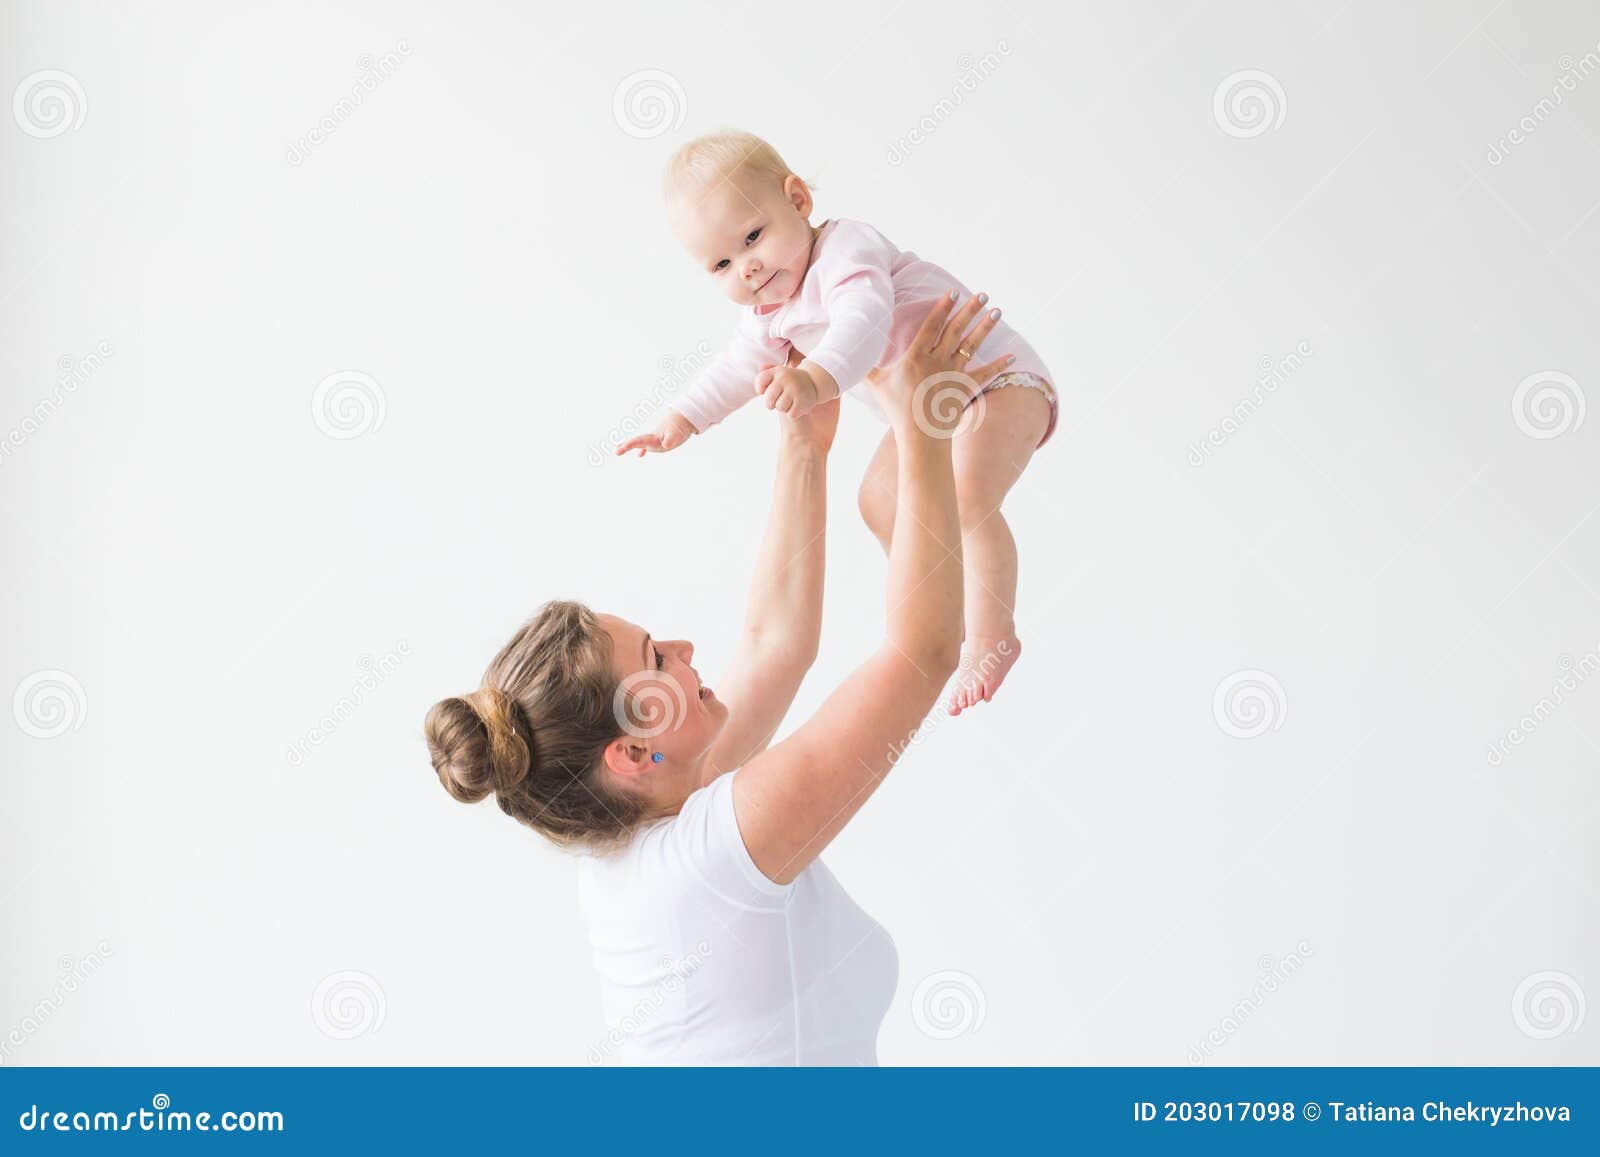 Mother Lifting Baby Girl. Happy Mother Picks Up and Throws His Lifting ...